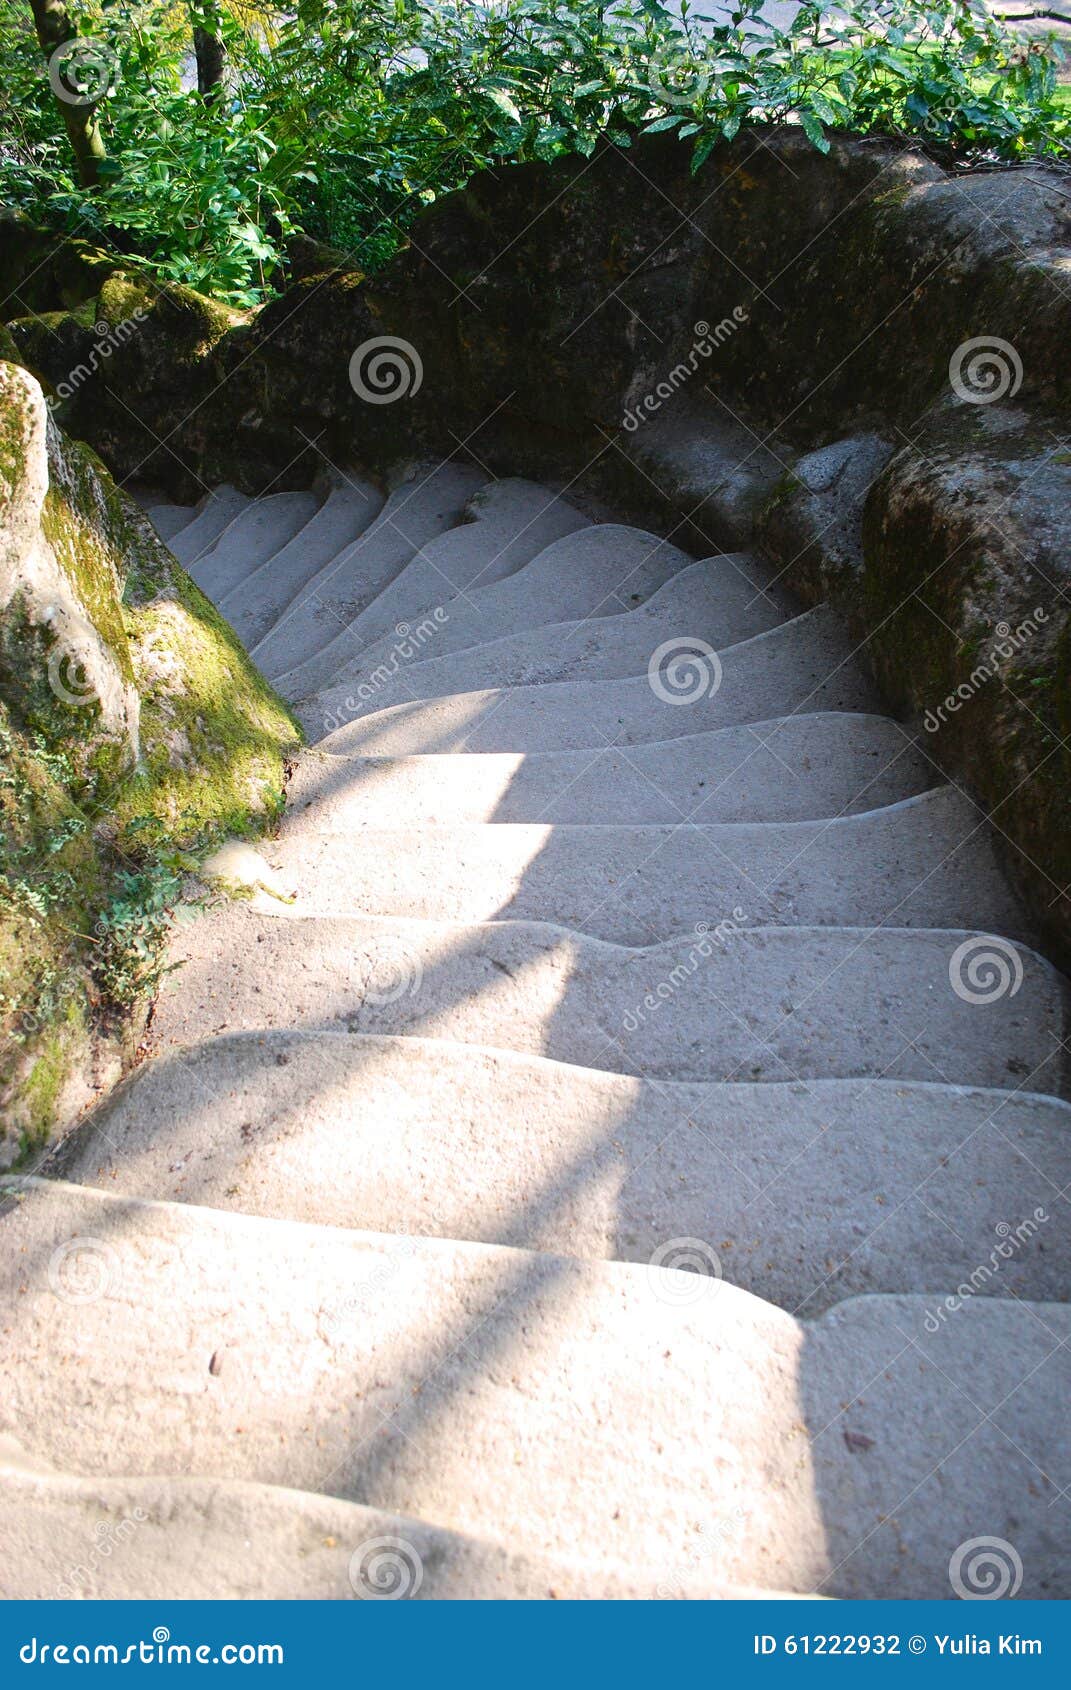 6,128 Steep Stone Steps Images, Stock Photos, 3D objects, & Vectors